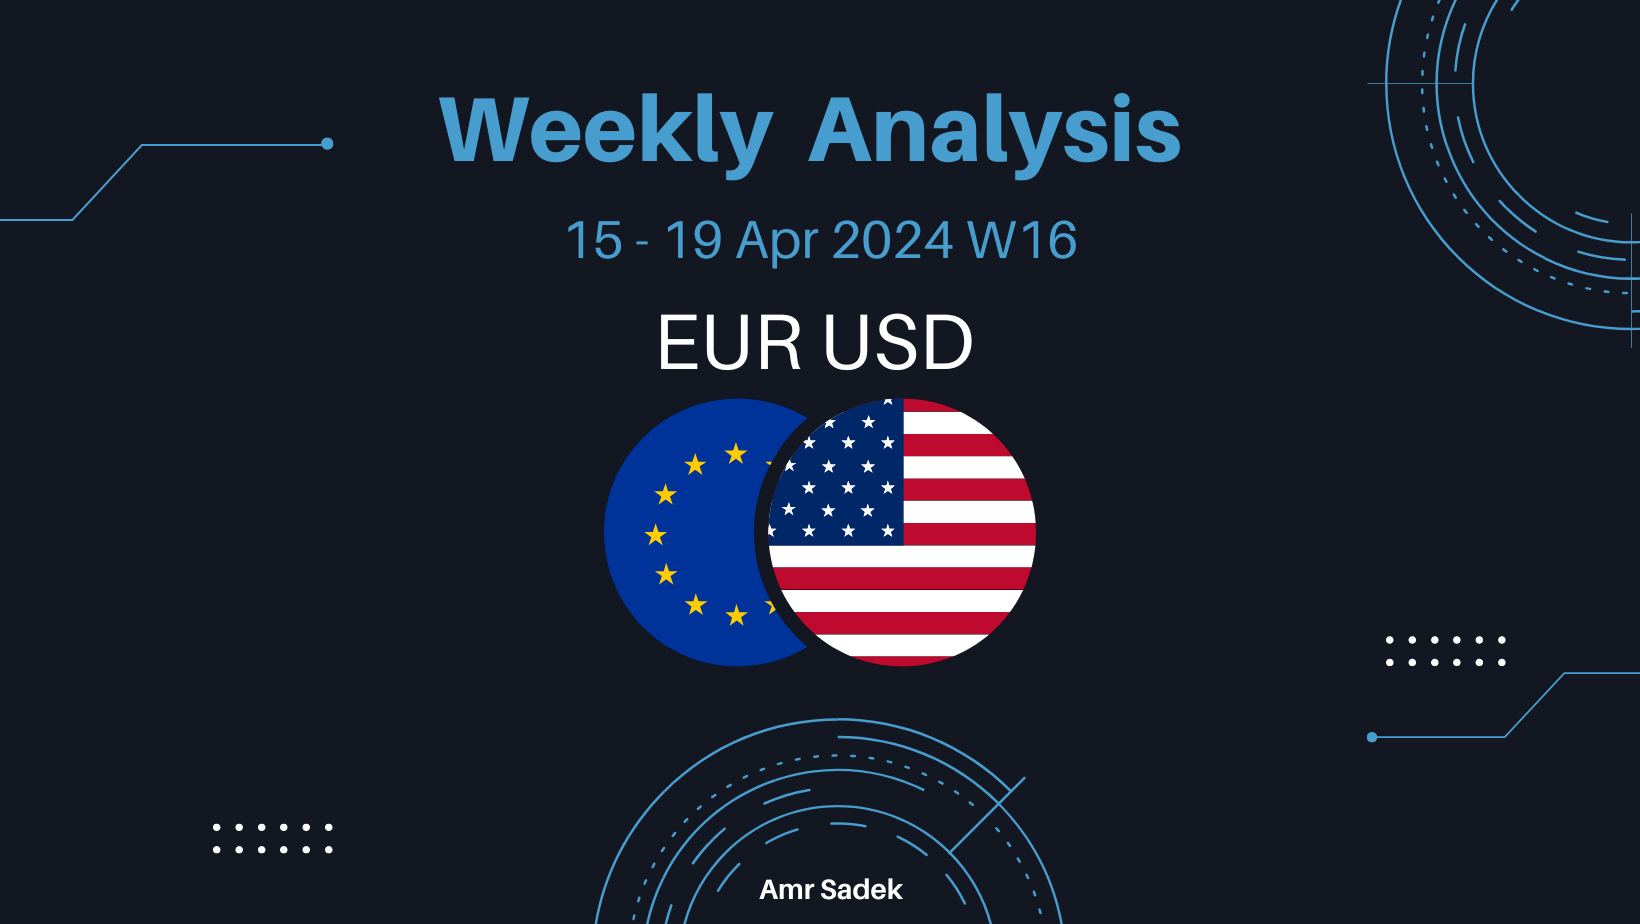 EURUSD 15-19 Apr 2024 W16 Weekly Analysis – Middle East Tension!